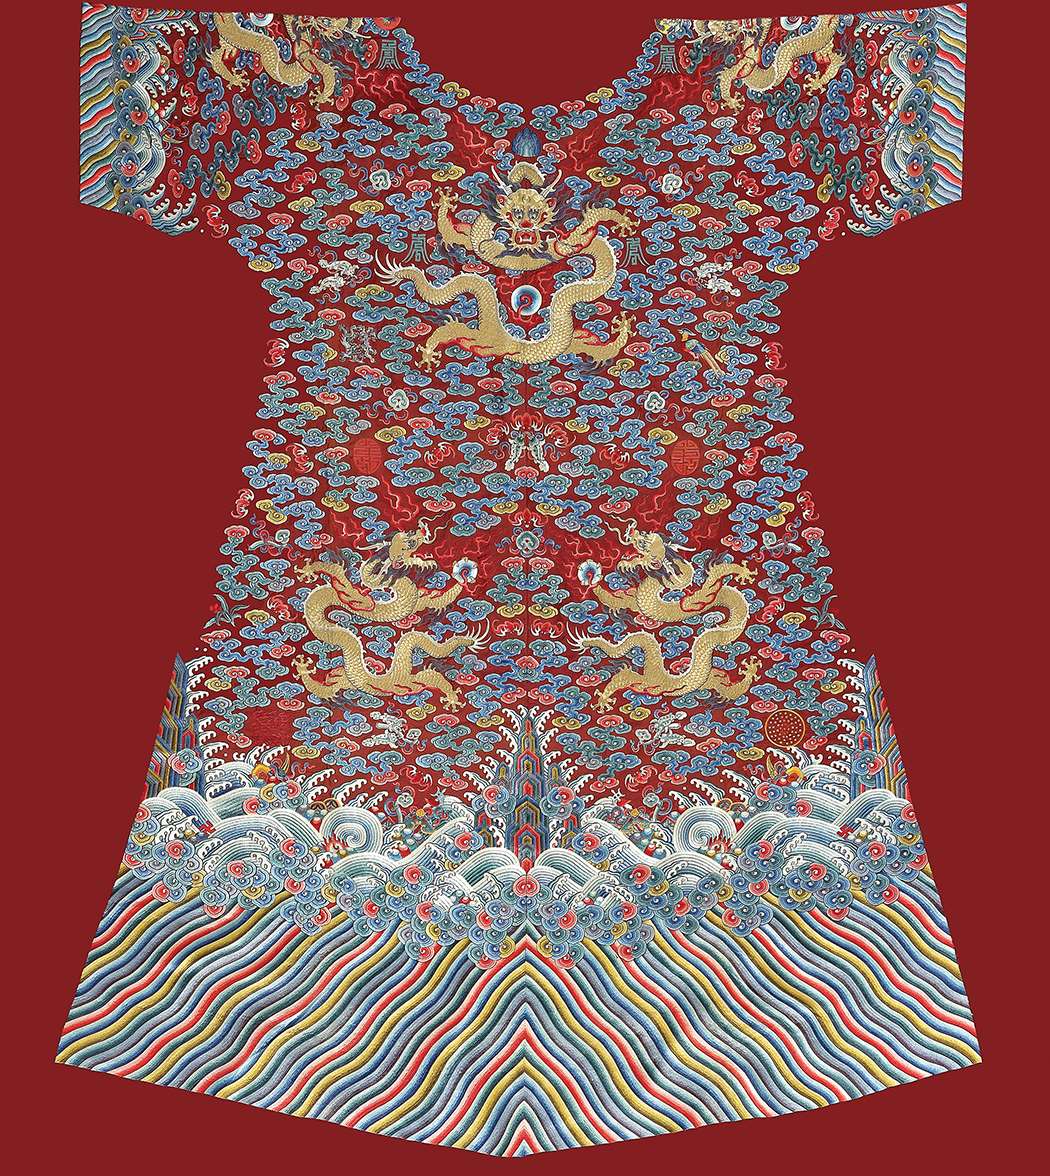 A deep-red yardage for semi-formal court robe embroidered with twelve imperial symbols<br> Qianlong period (1736 – 1795), Qing dynasty